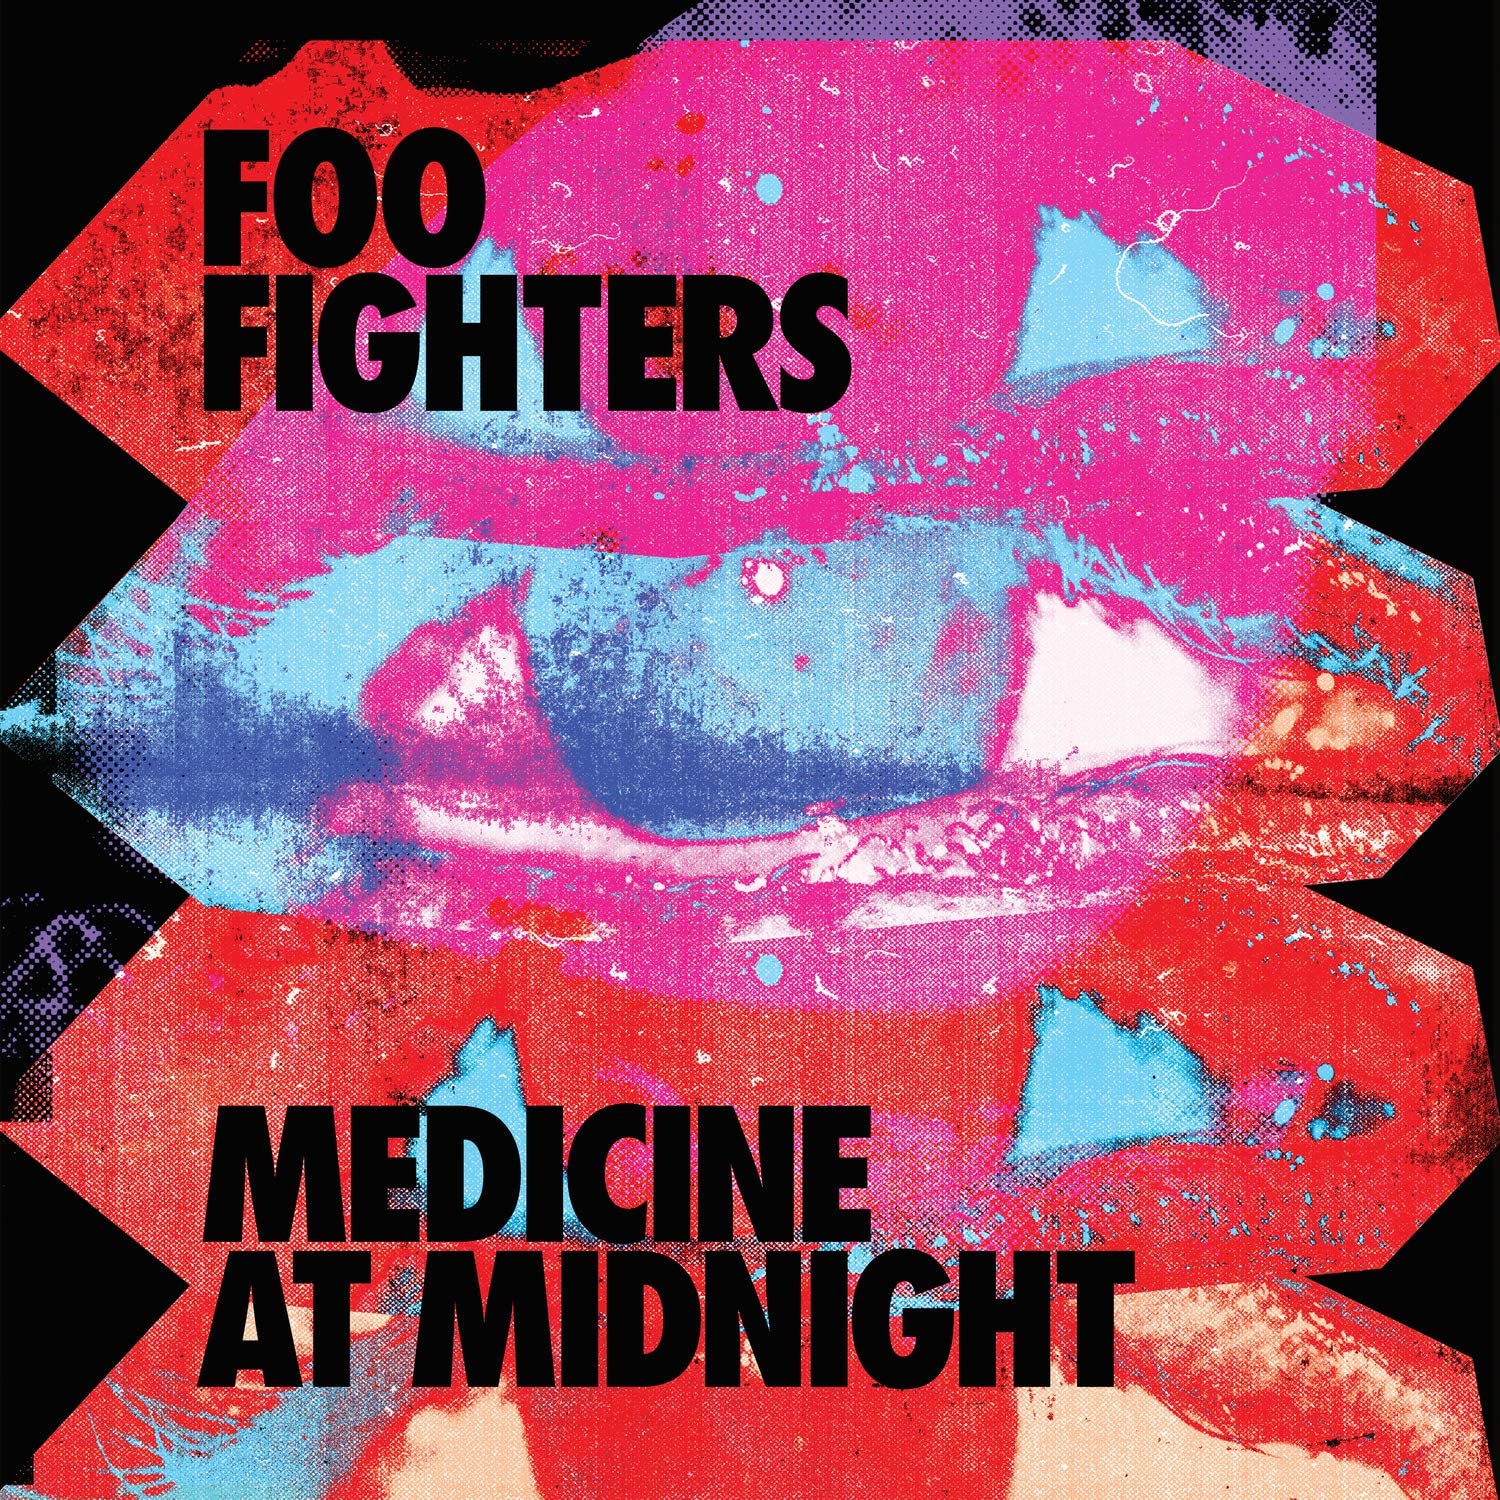 Medicine at Midnight is the brand new album on Vinyl from Foo Fighters, and packs nine new songs into a tight 37 minutes.